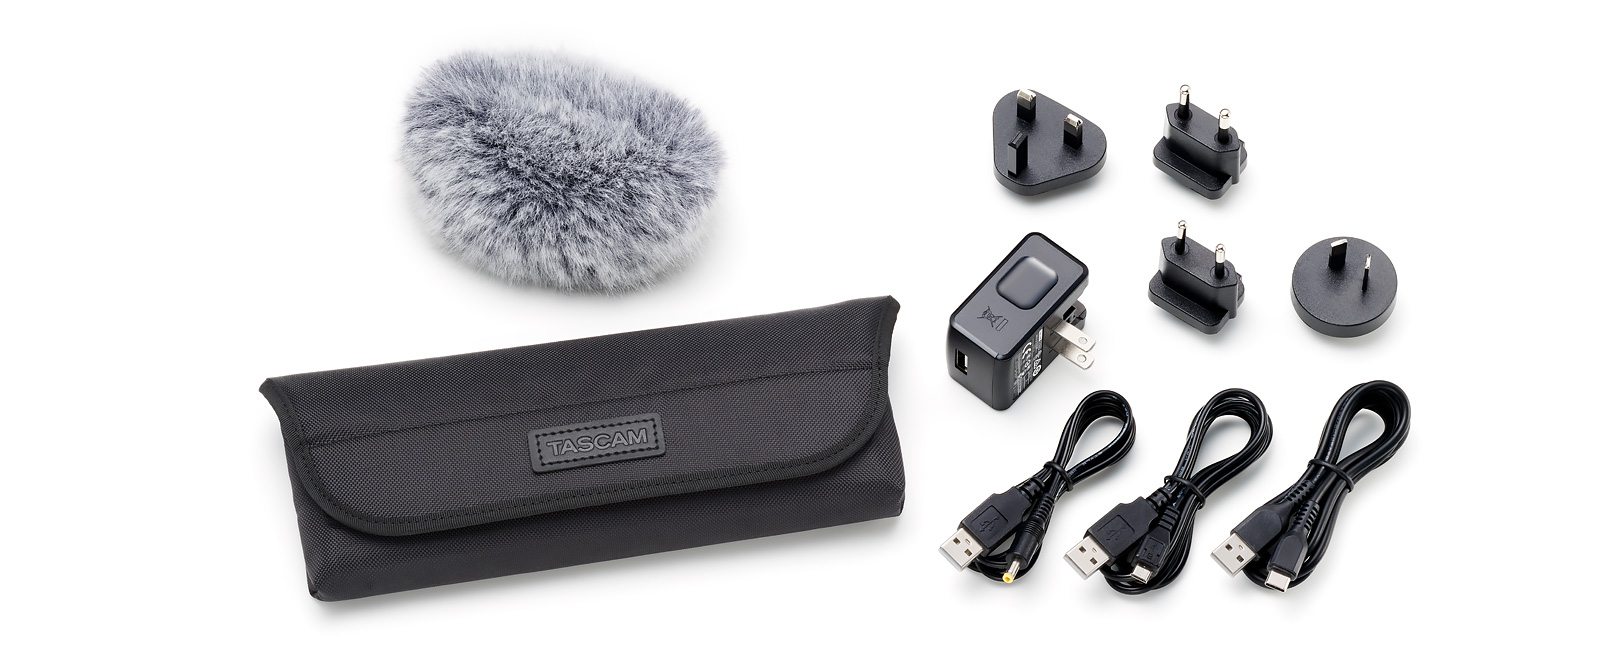 TASCAM Releases New Handheld Recorder Accessory Packs For DR-Series Handheld Recorders and Multi-con